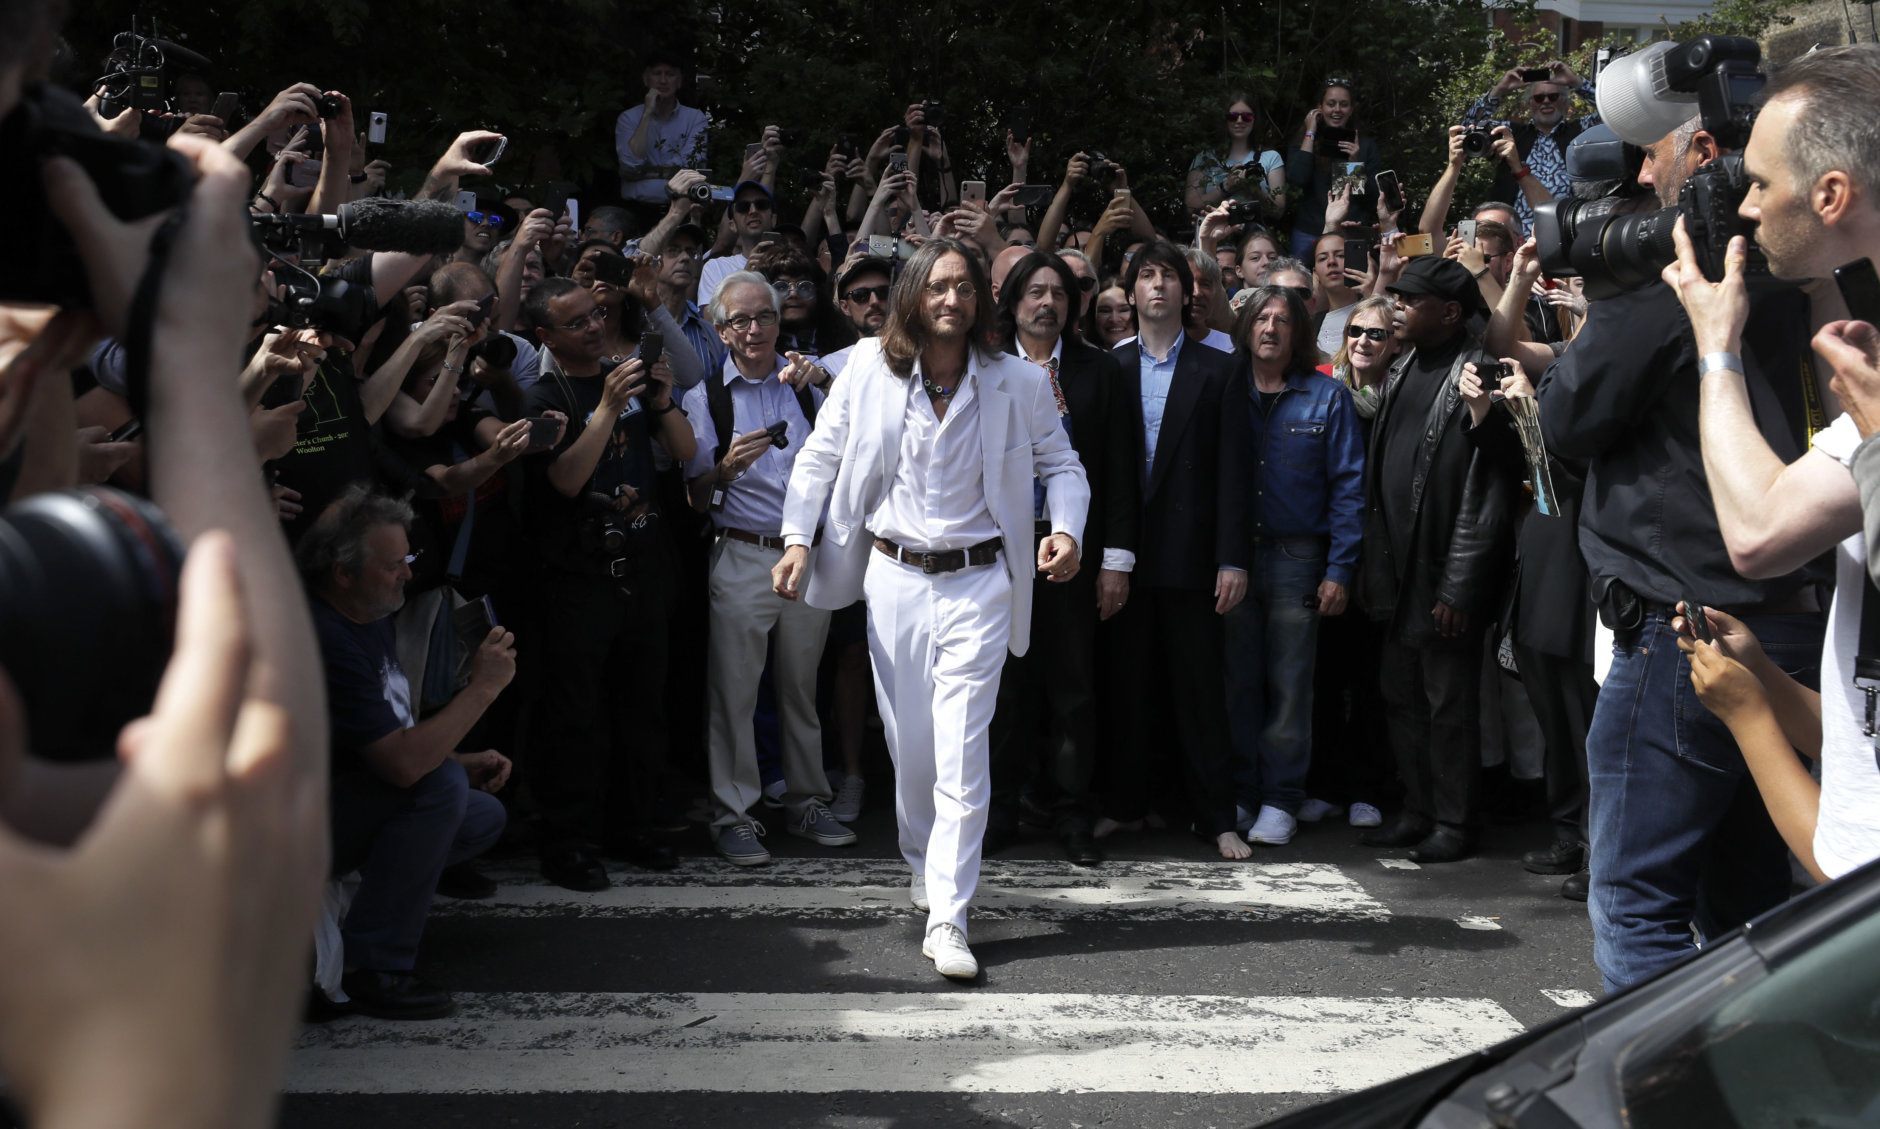 Thousands of fans gather to walk across the Abbey Road zebra crossing, on the 50th anniversary of British pop musicians The Beatles doing it for the cover of their album 'Abbey Road' in St Johns Wood in London, Thursday, Aug. 8, 2019. They aimed to cross 50 years to the minute since the 'Fab Four' were photographed for the album. (AP Photo/Kirsty Wigglesworth)